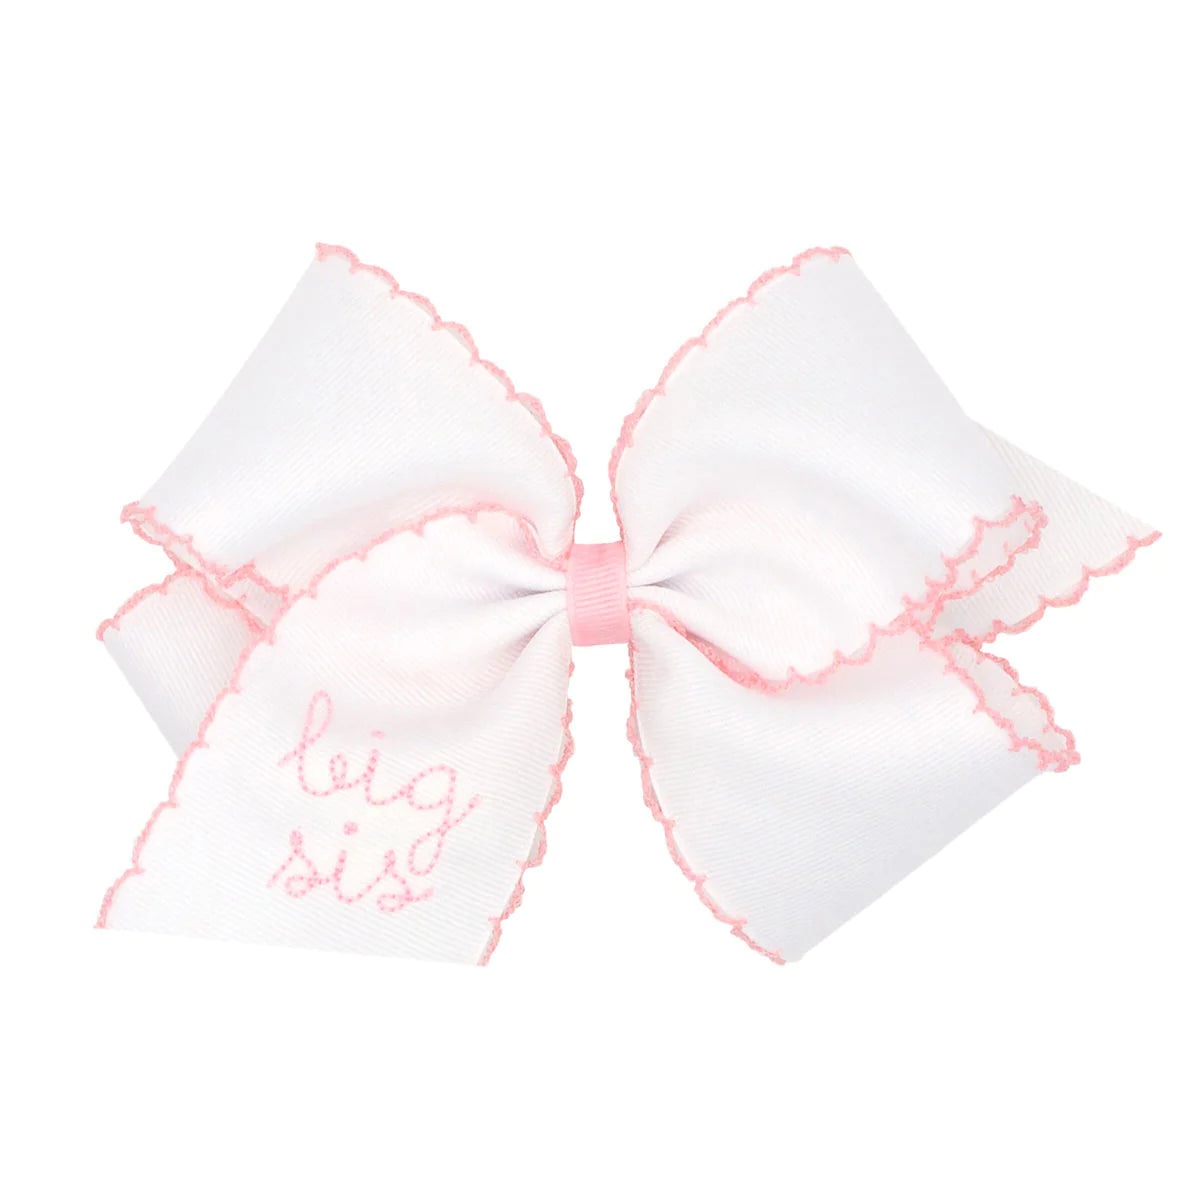 Embroidered Big Sis Moonstitch White Bow